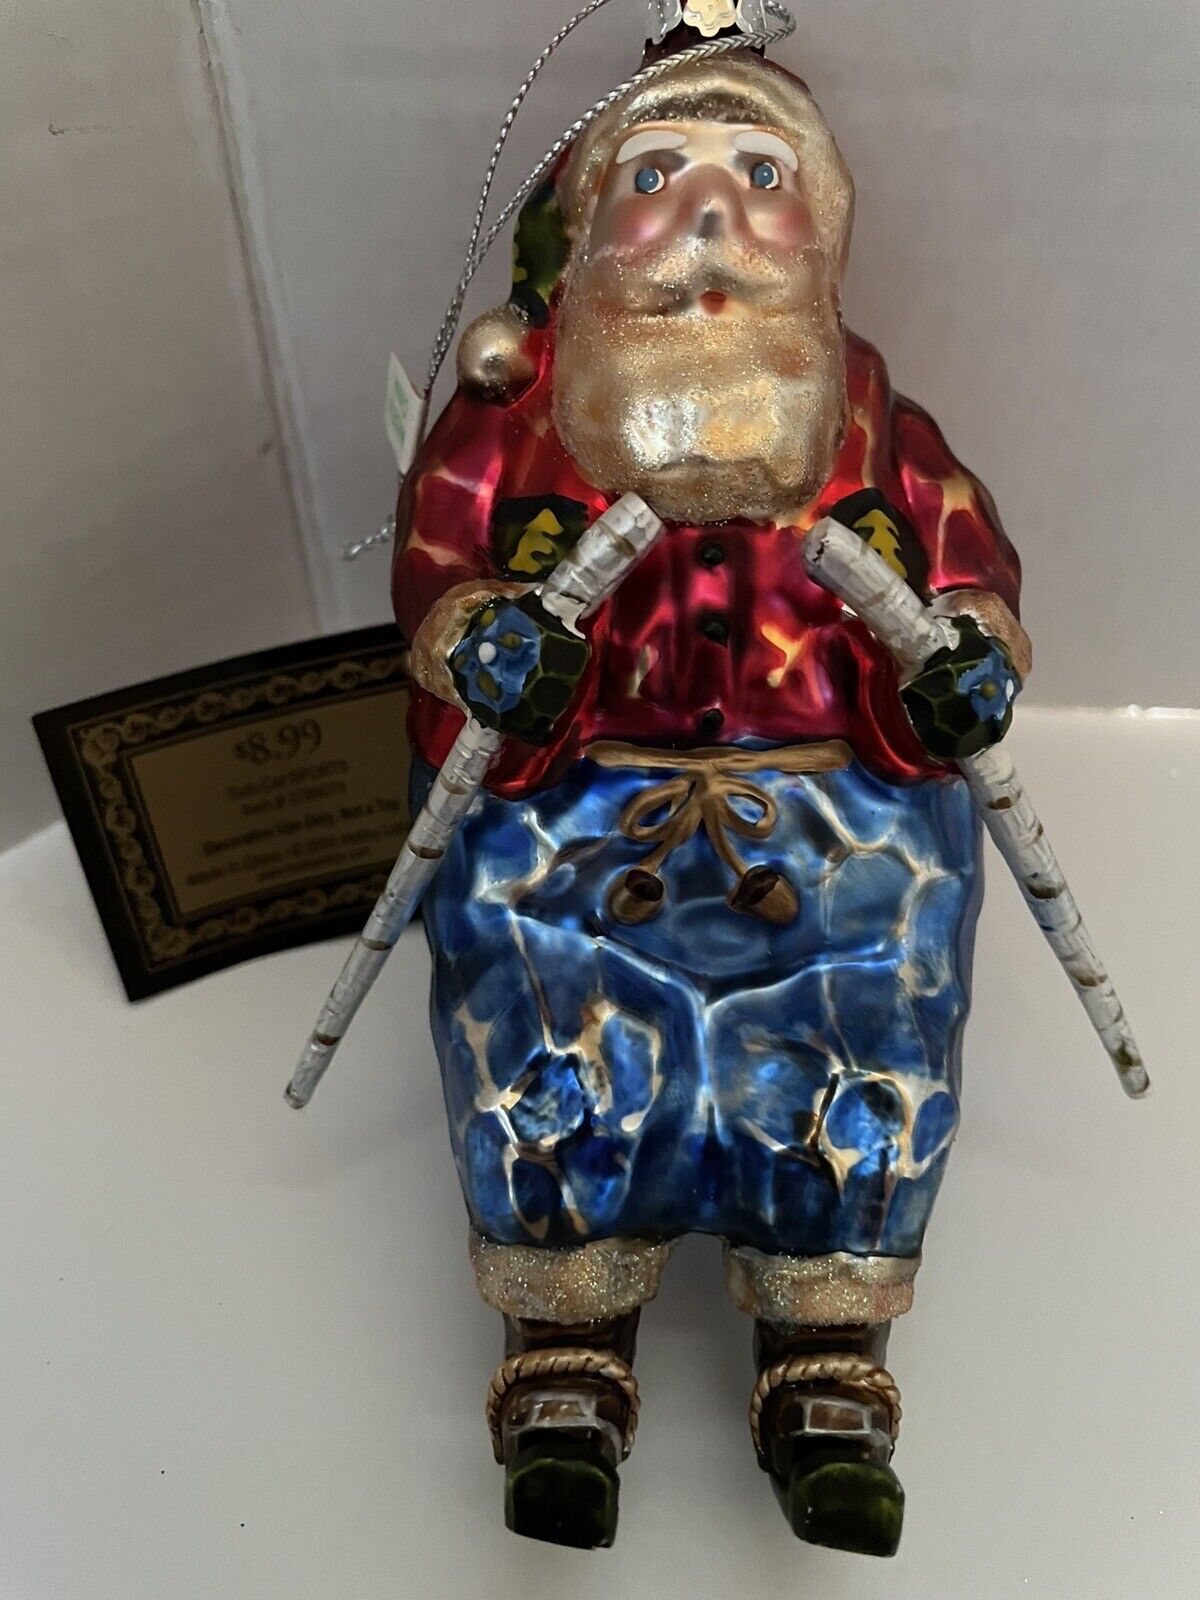 ROBERT STANLEY 2008 COLLECTION GLASS SANTA CLAUS SKIING 6”CHRISTMAS ORNAMENT NWT